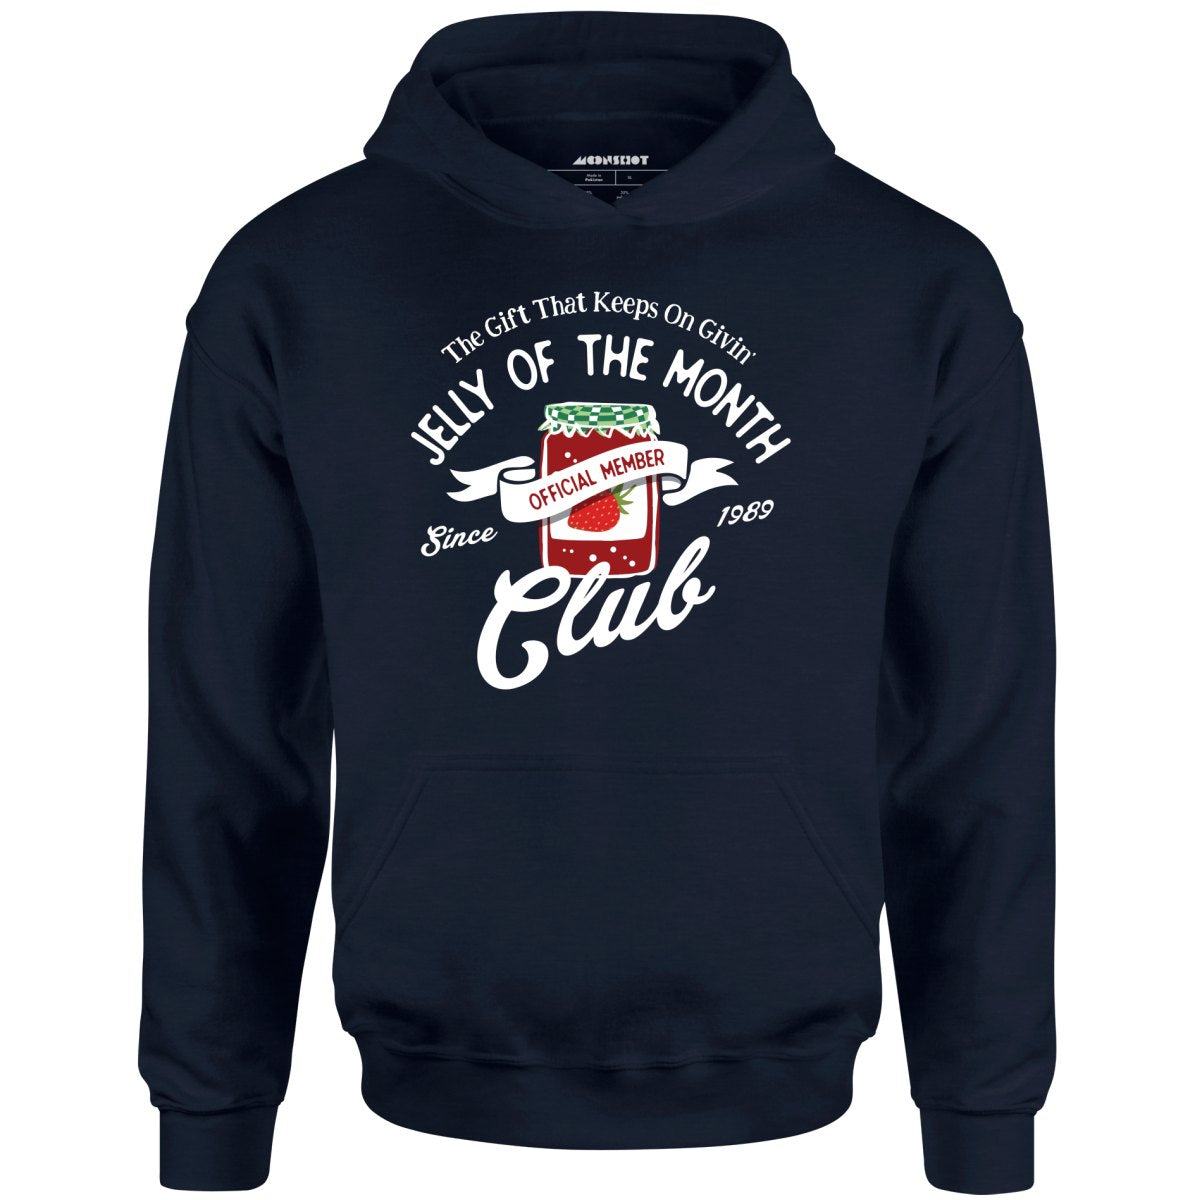 Jelly of the Month Club - Unisex Hoodie